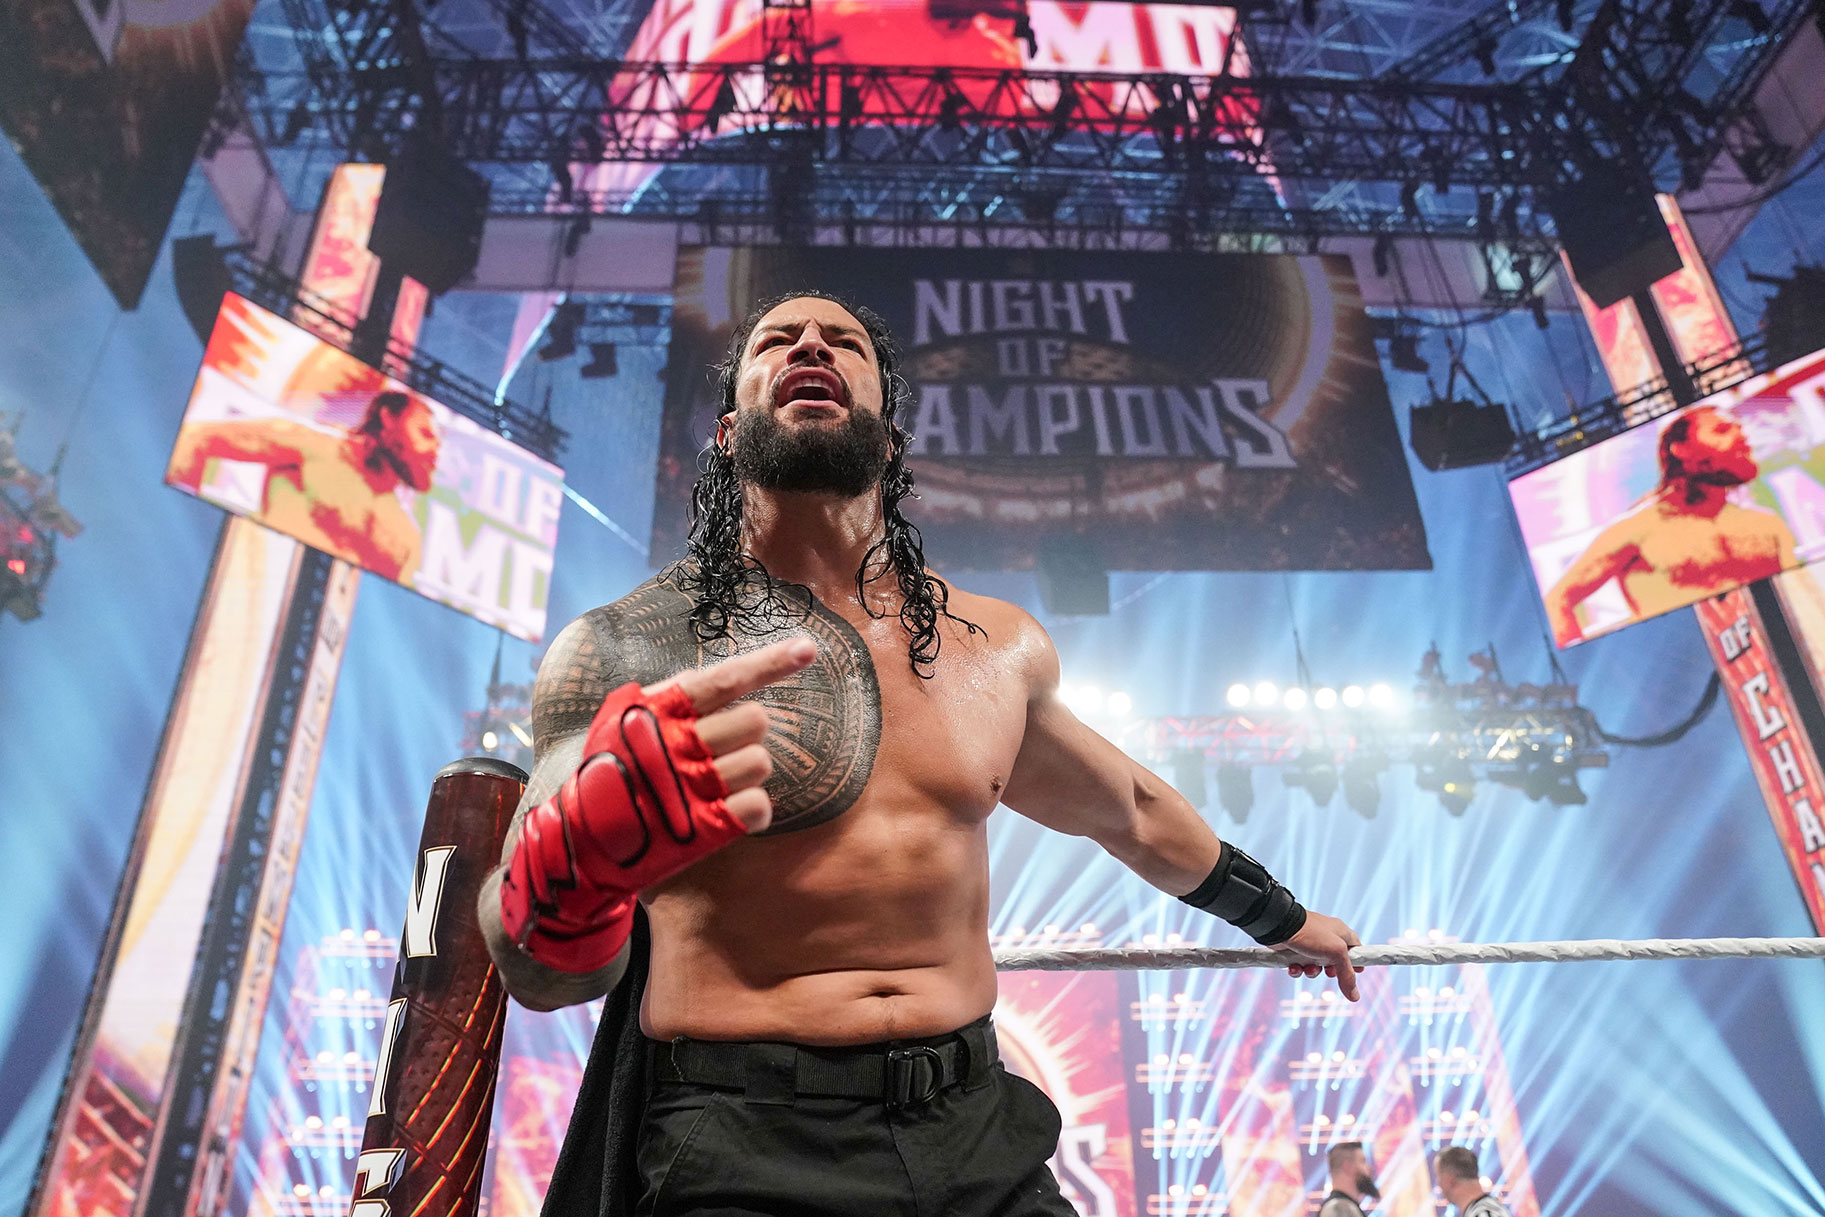 What's Next for Roman Reigns After WWE Night of Champions? USA Insider